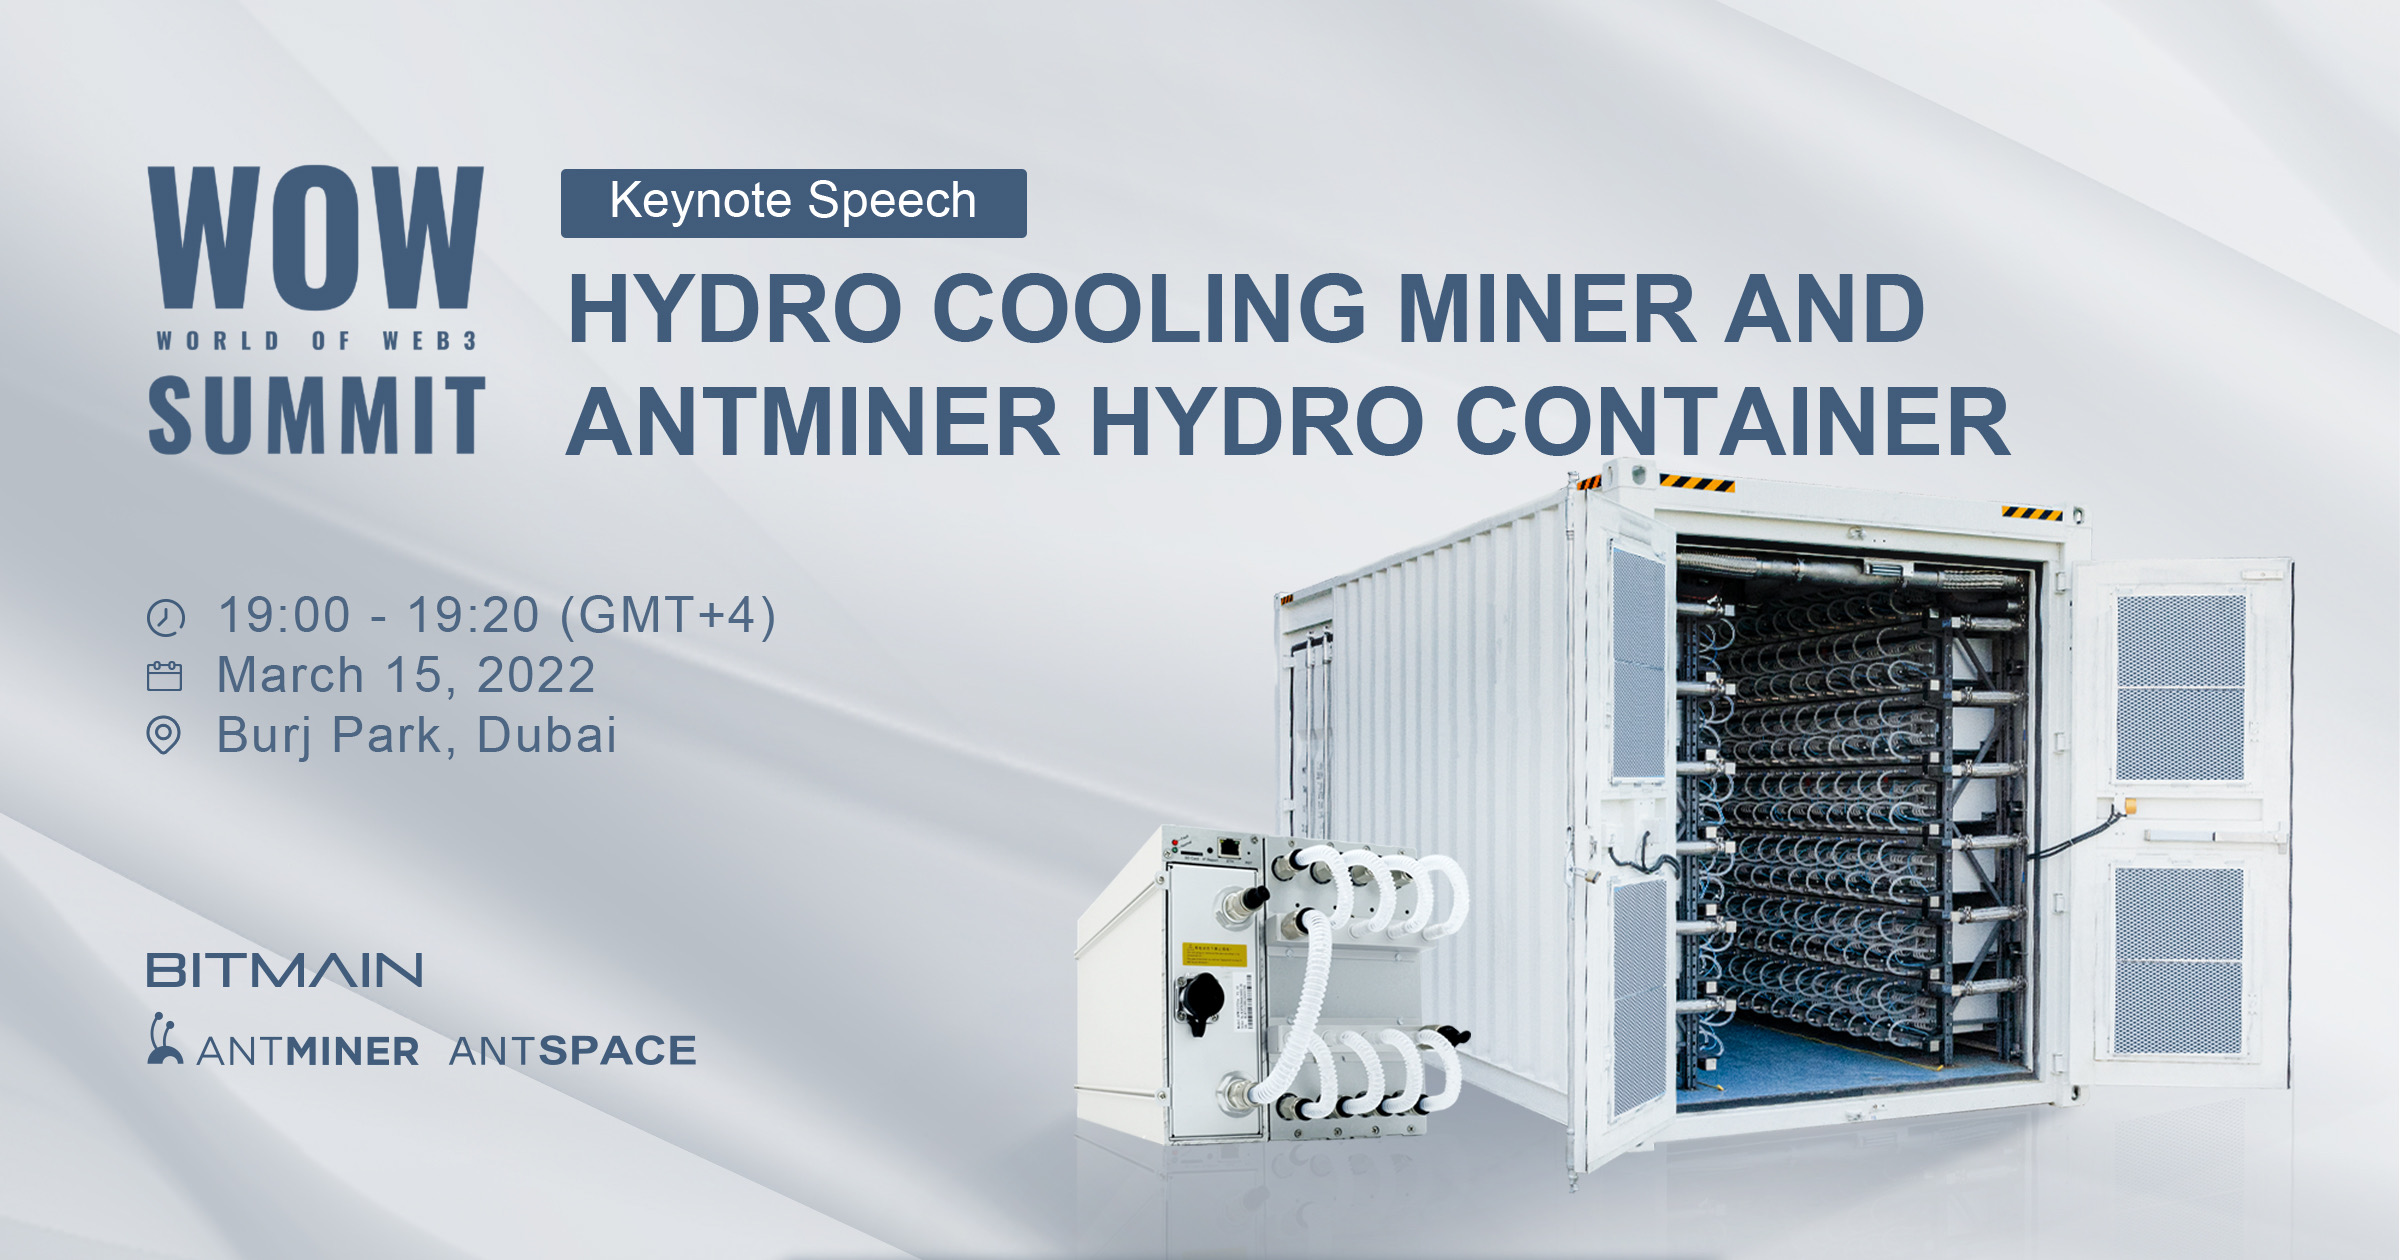 Antminer s21 hydro 335 th s. Bitmain Antminer s19 XP Hydro. Antminer s19 XP Hyd. Antminer s19 Hydro. Bitmain Antminer s19 XP Hyd (255th).